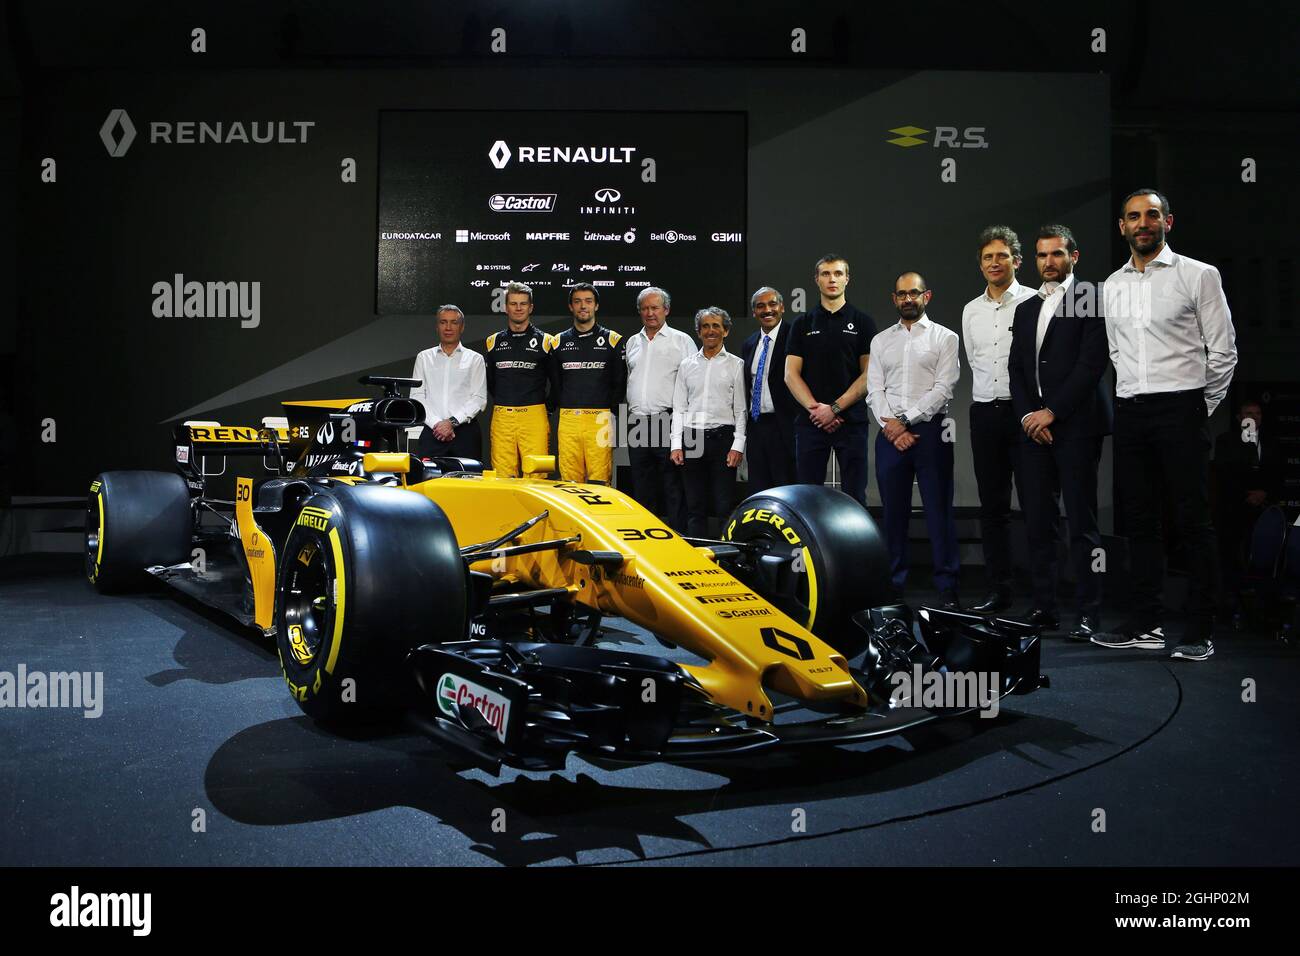 (L bis R): Bob Bell (GBR) Renault Sport F1 Team Chief Technical Officer; Nico Hulkenberg (GER) Renault Sport F1 Team; Jolyon Palmer (GBR) Renault Sport F1 Team; Jerome Stoll (FRA) Renault Sport F1 President; Alain Prost (FRA); Mandhir Singh, Castol COO; Sergey Sirotkin (RUS) Renault Sport F1 Team Dritter Fahrer; Thierry Koskas, Executive Vice President of Sales and Marketing bei Renault, Pepijn Richter, Microsoft Director of Product Marketing, Tommaso Volpe, Infiniti Global Director of Motorsport, Cyril Abiteboul (FRA), Renault Sport F1 Managing Director, und das Renault Sport F1 Team RS17. 21.02.201 Stockfoto